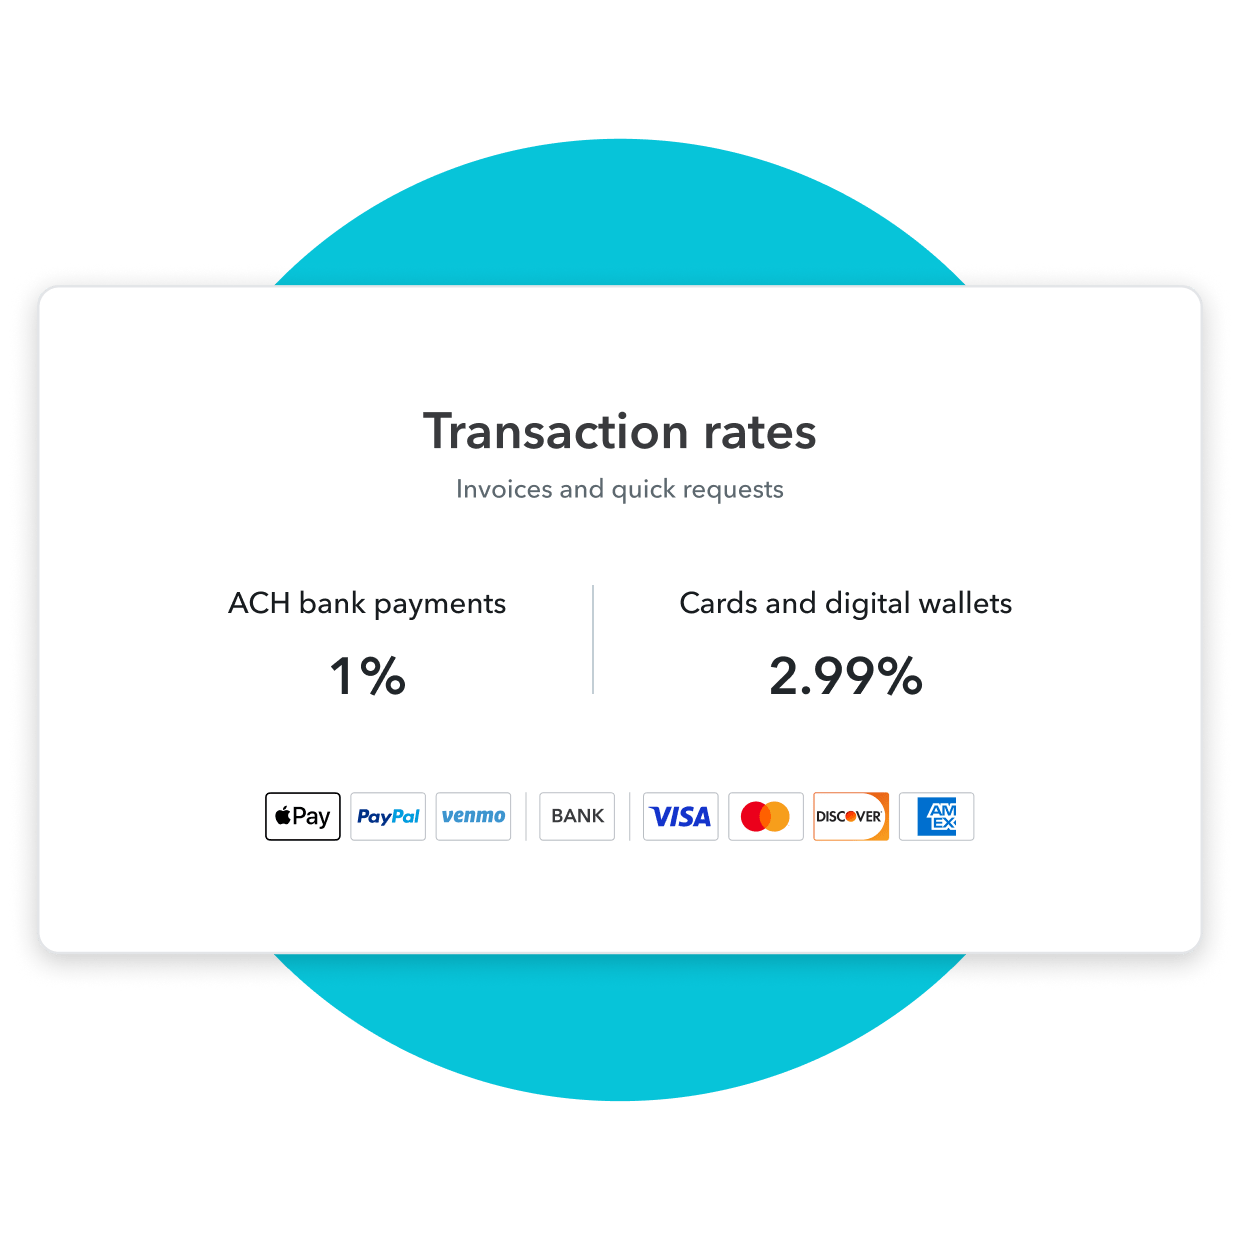 Transaction rates for invoices and quick requests: ACH bank payments are 1% and cards and digital wallets are 2.99%.